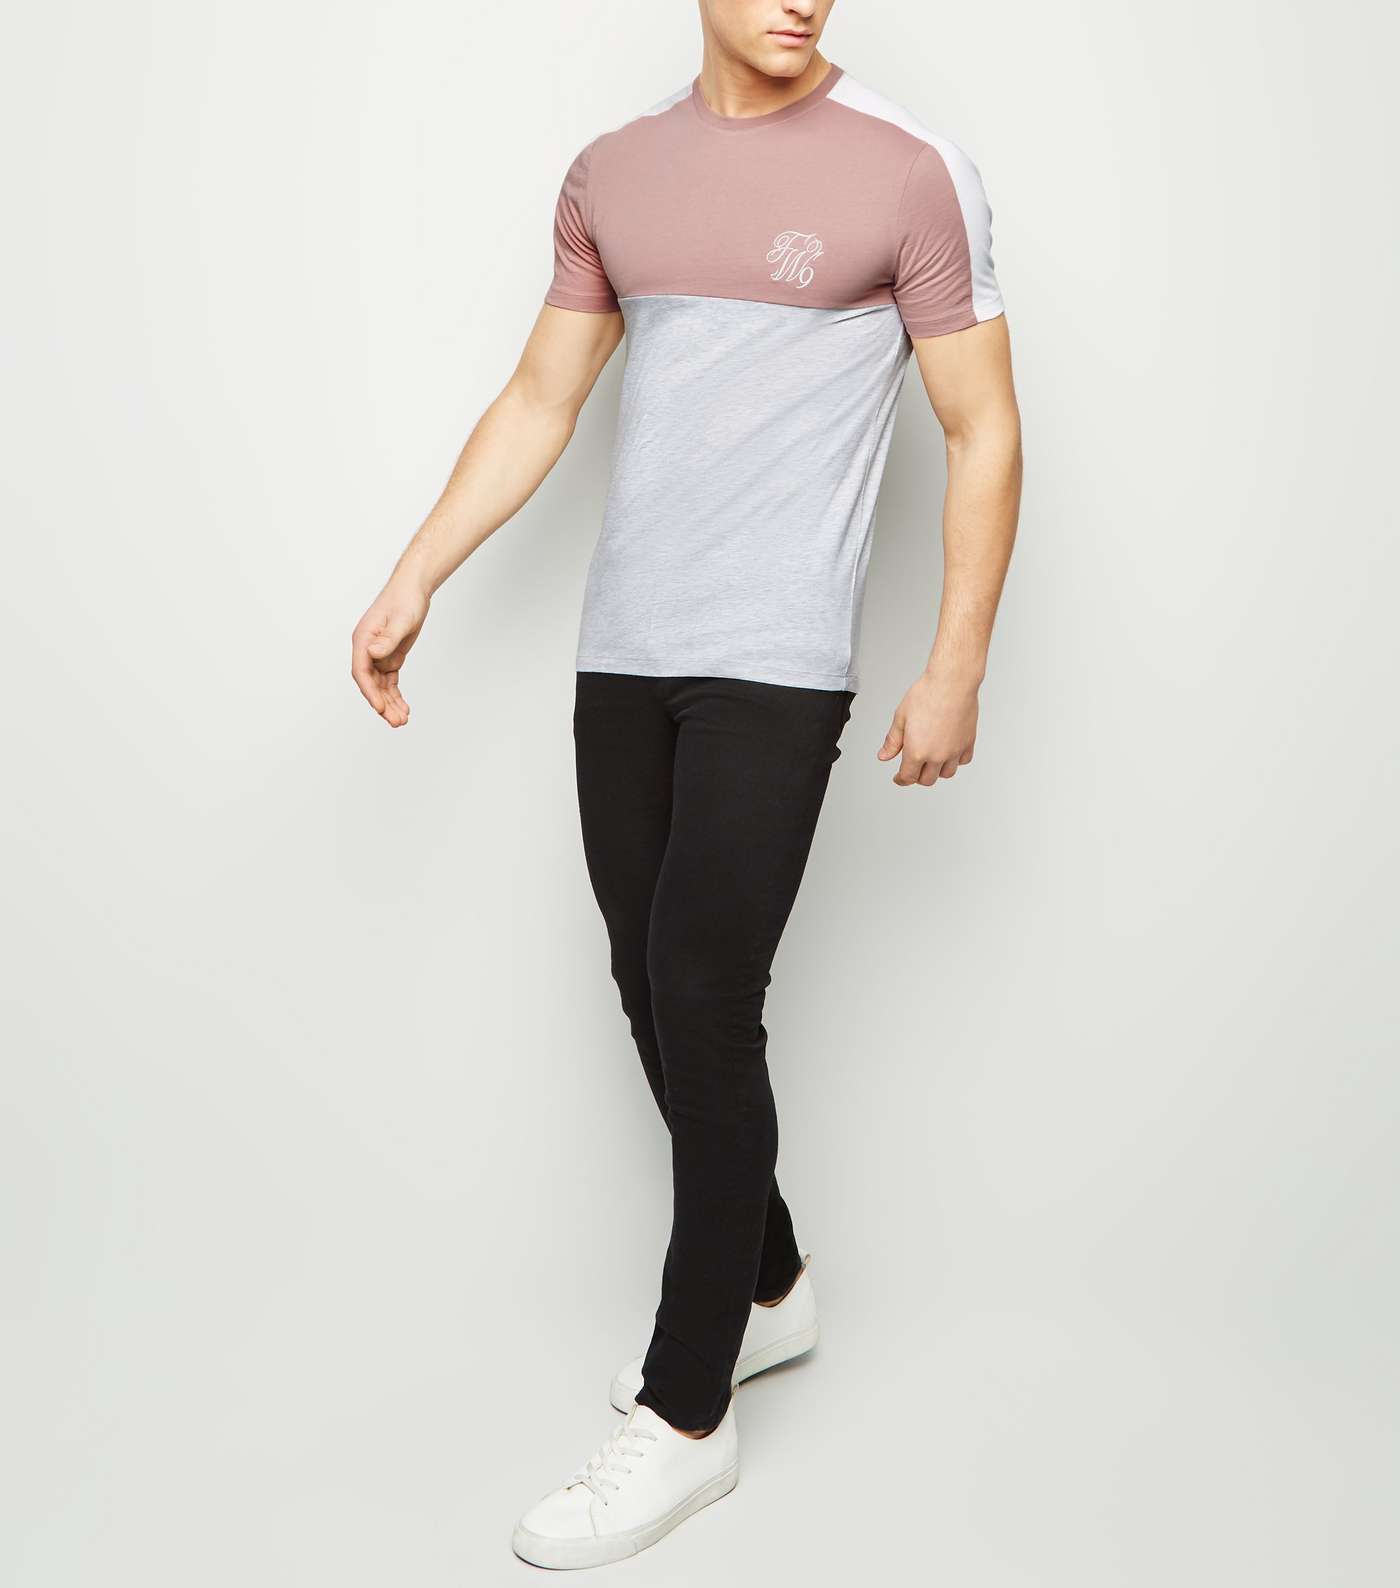 Mid Pink TW9 Embroidered Muscle Fit T-Shirt Image 2